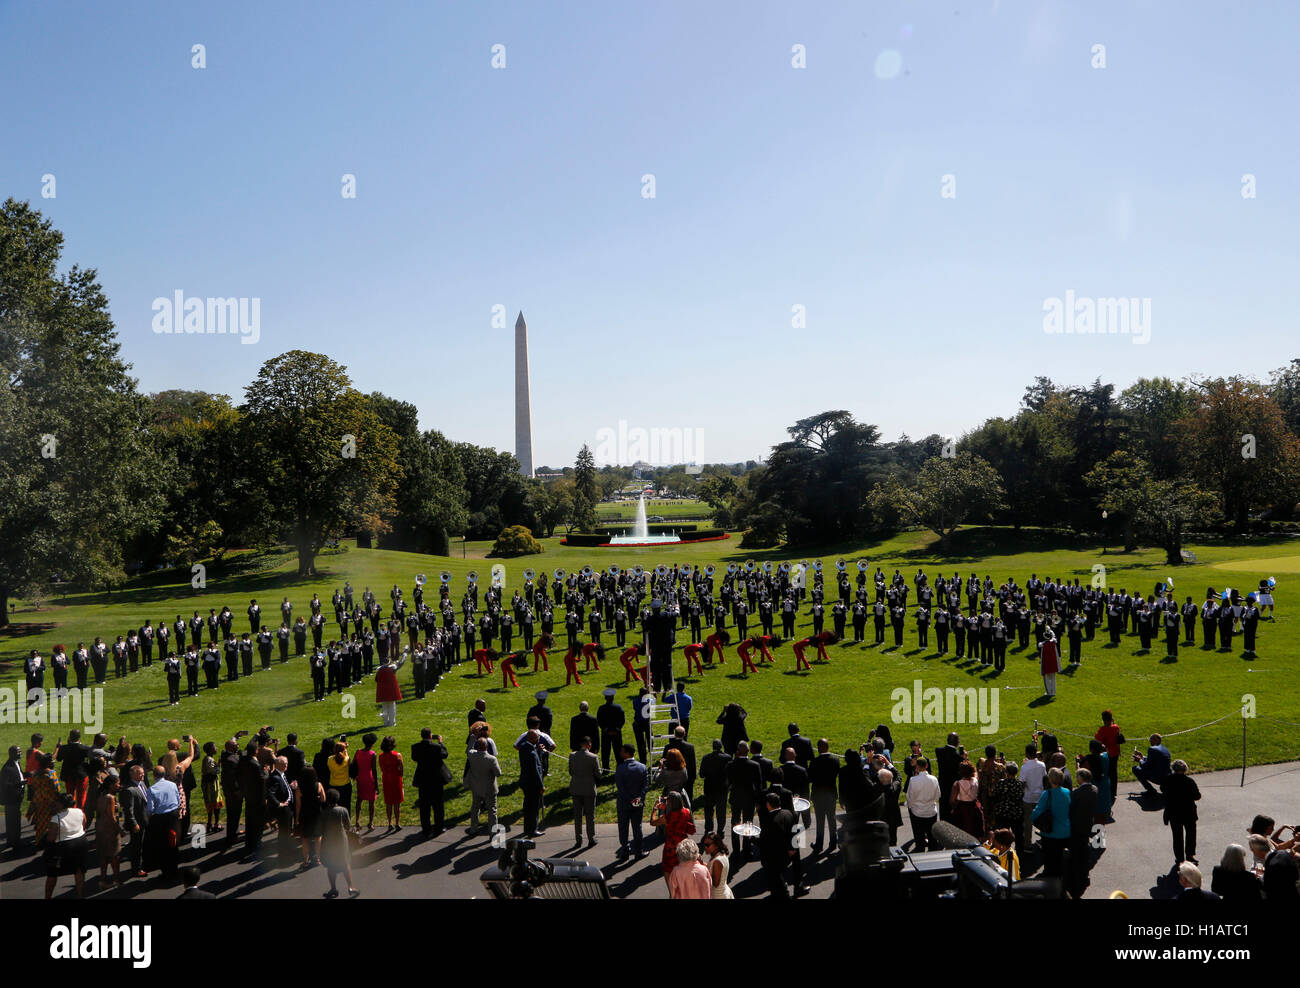 The Tennessee State Marching Band performs on the South Lawn of the White House during a reception in honor of the opening of the Smithsonian National Museum of African American History and Culture September 22, 2016, Washington, DC. Credit: Aude Guerrucci/Pool via CNP - NO WIRE SERVICE - Stock Photo